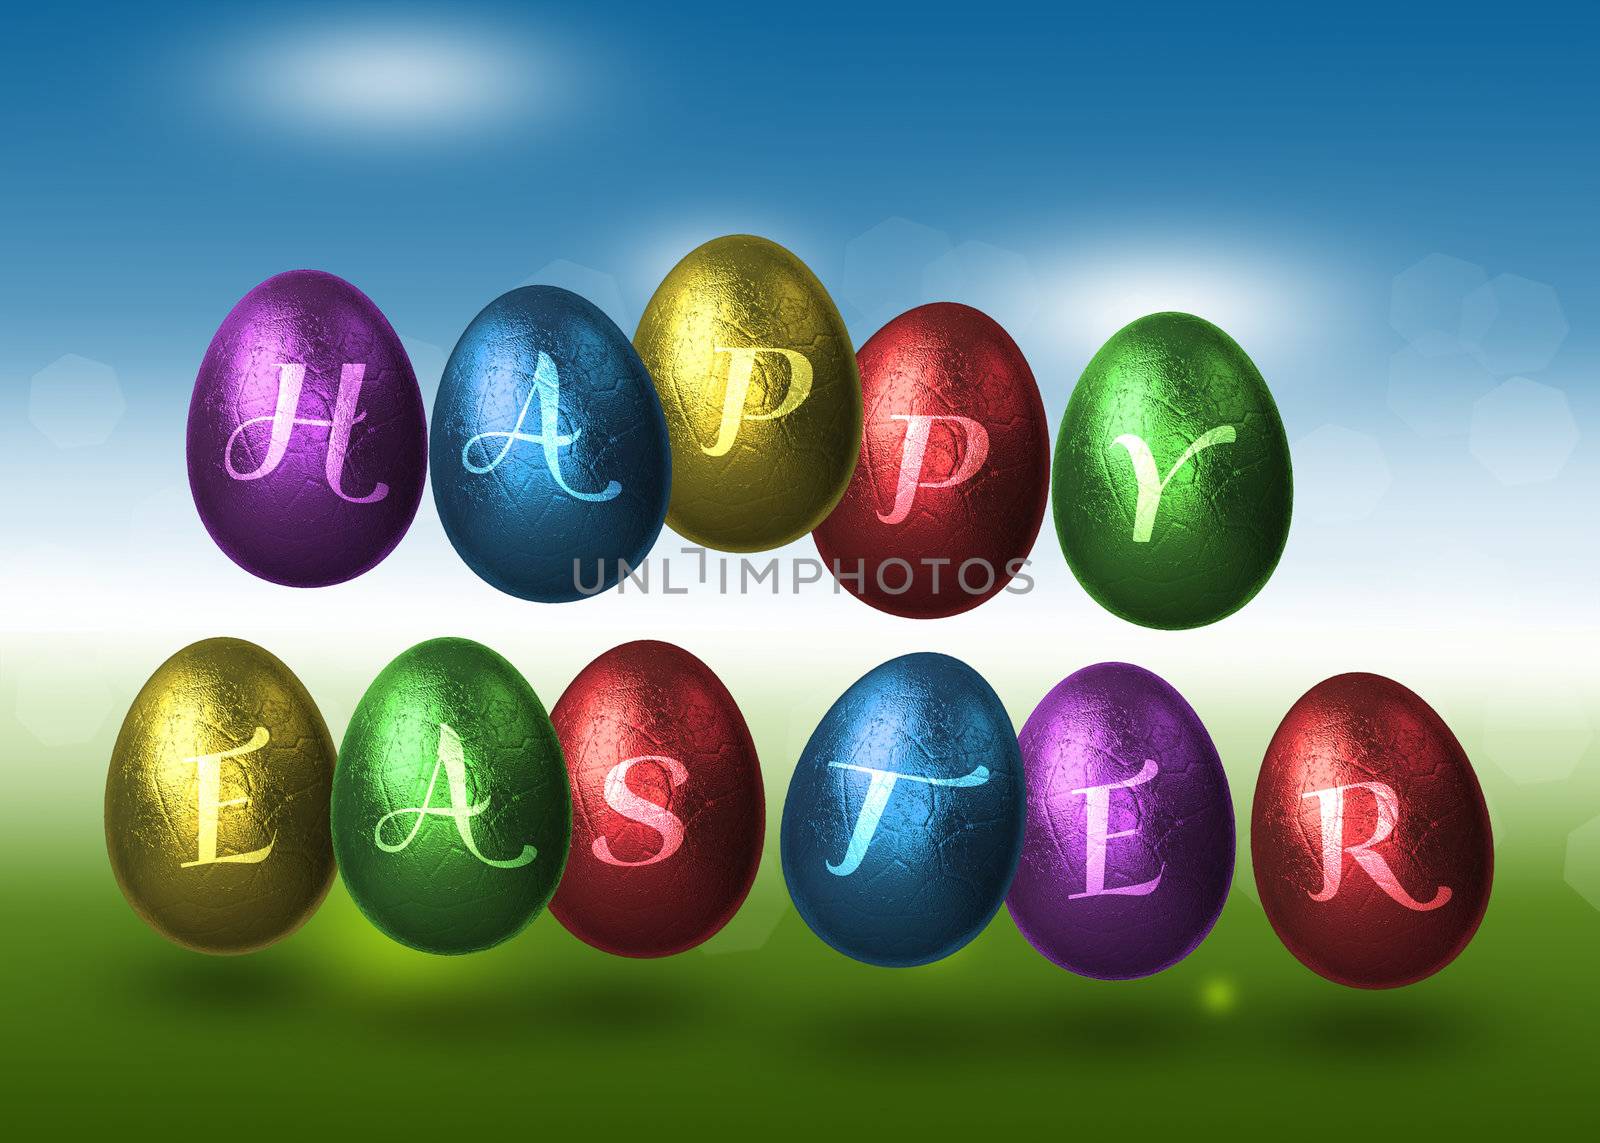 A colourful easter illustration: Metalic style coloured Easter eggs with "Happy Easter" lettering.